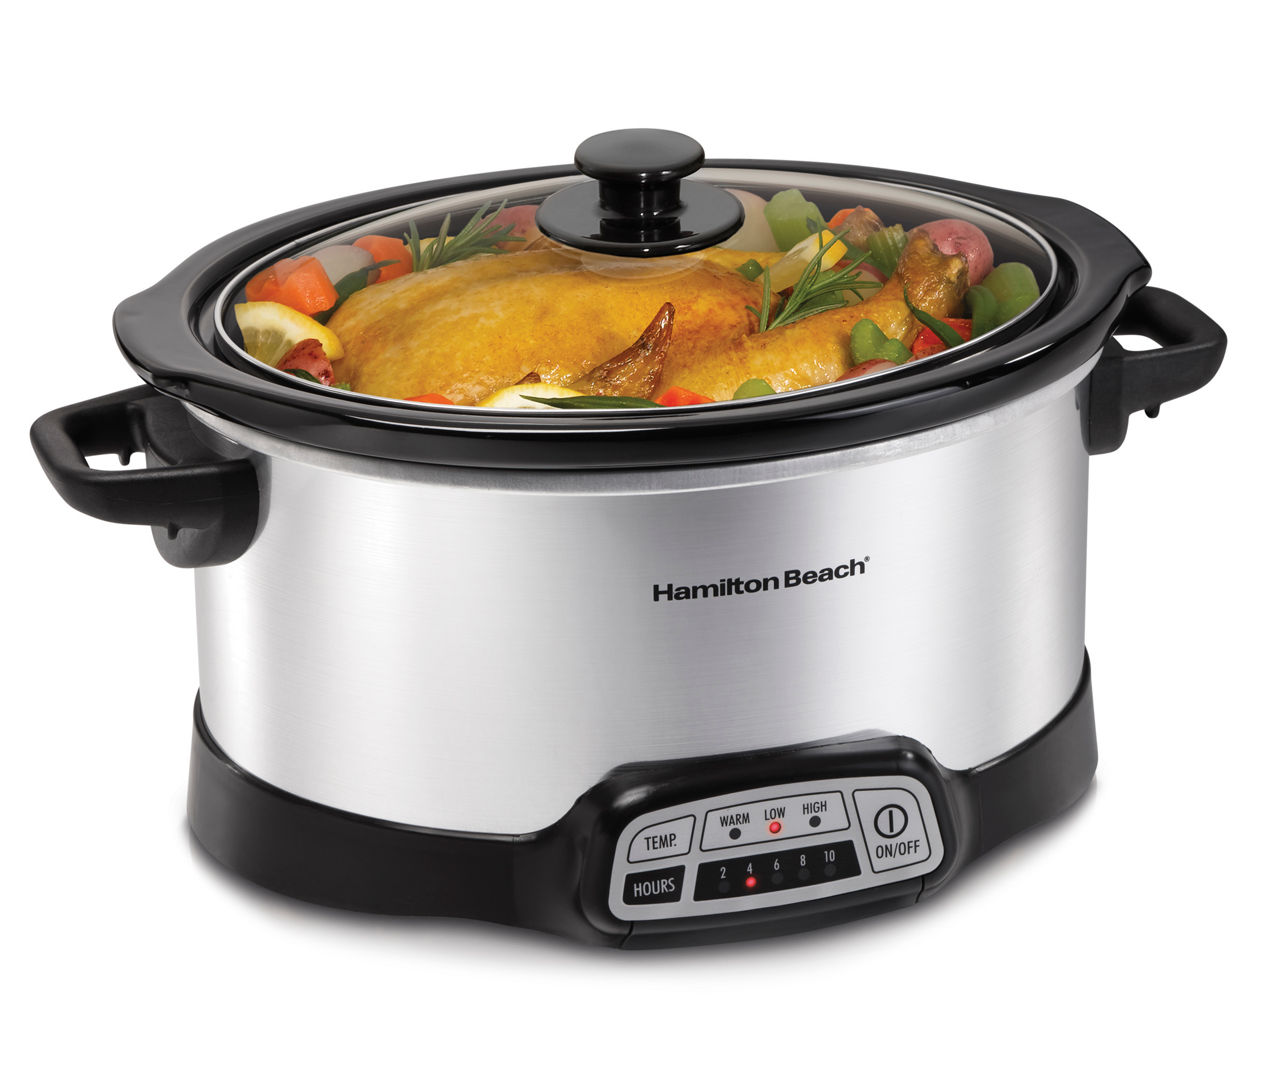 Crock-Pot 6 Quart Programmable Slow Cooker with Timer and Auto